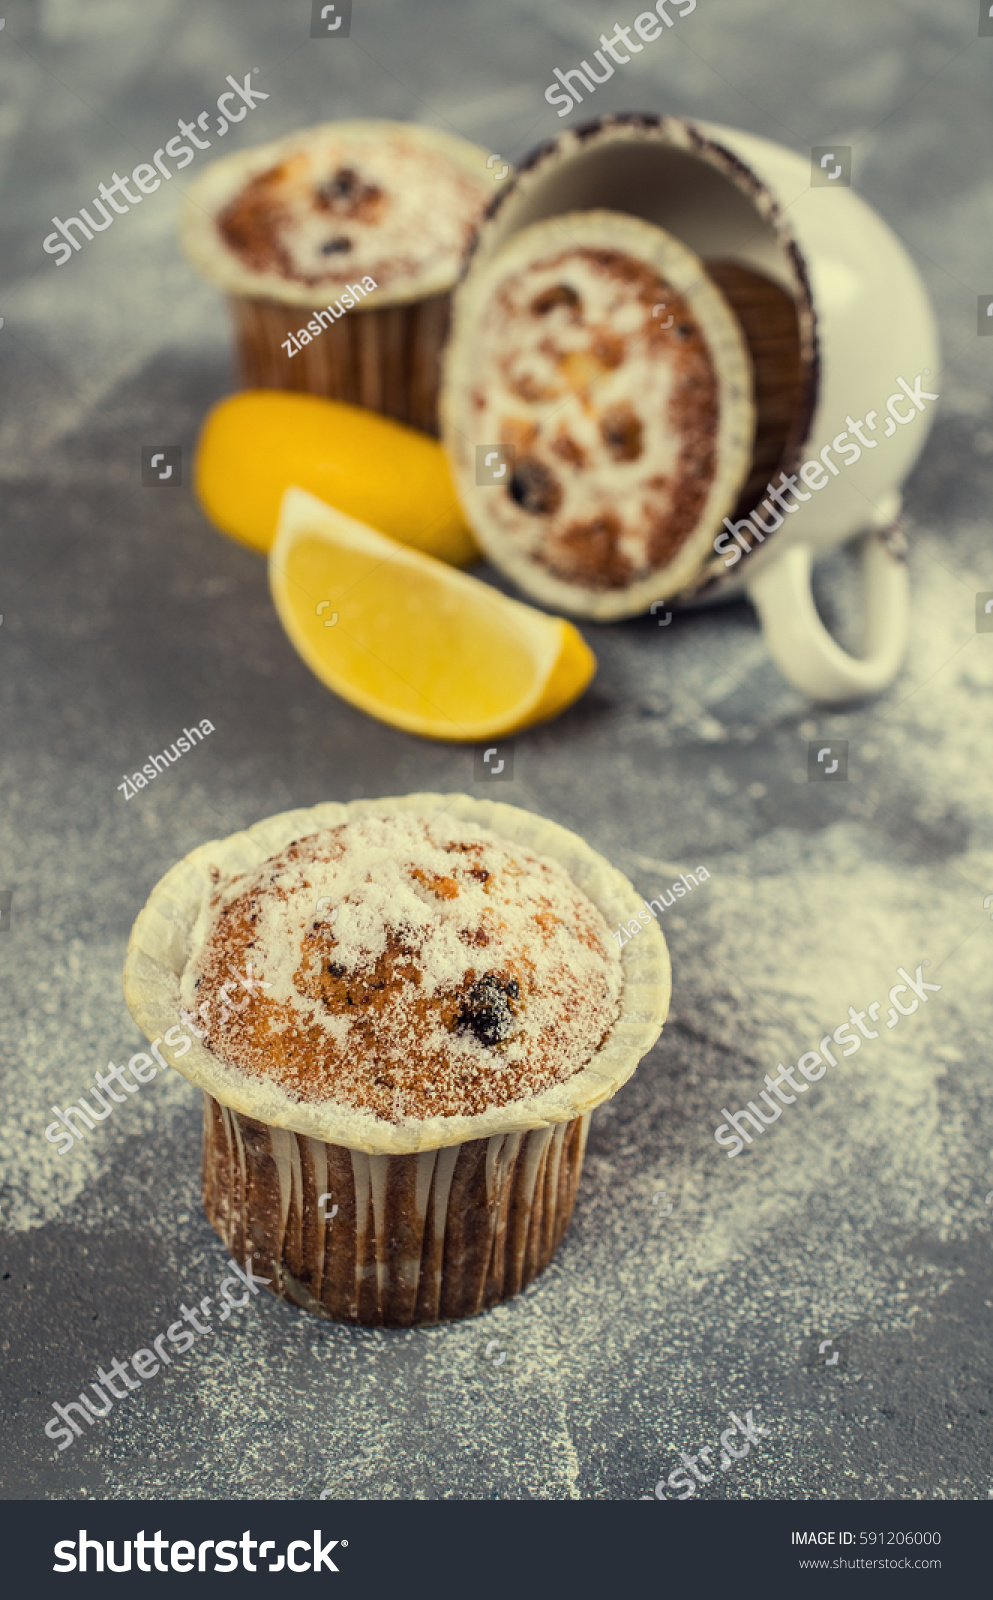 Muffins with raisins and powdered sugar. Selective focus. #591206000